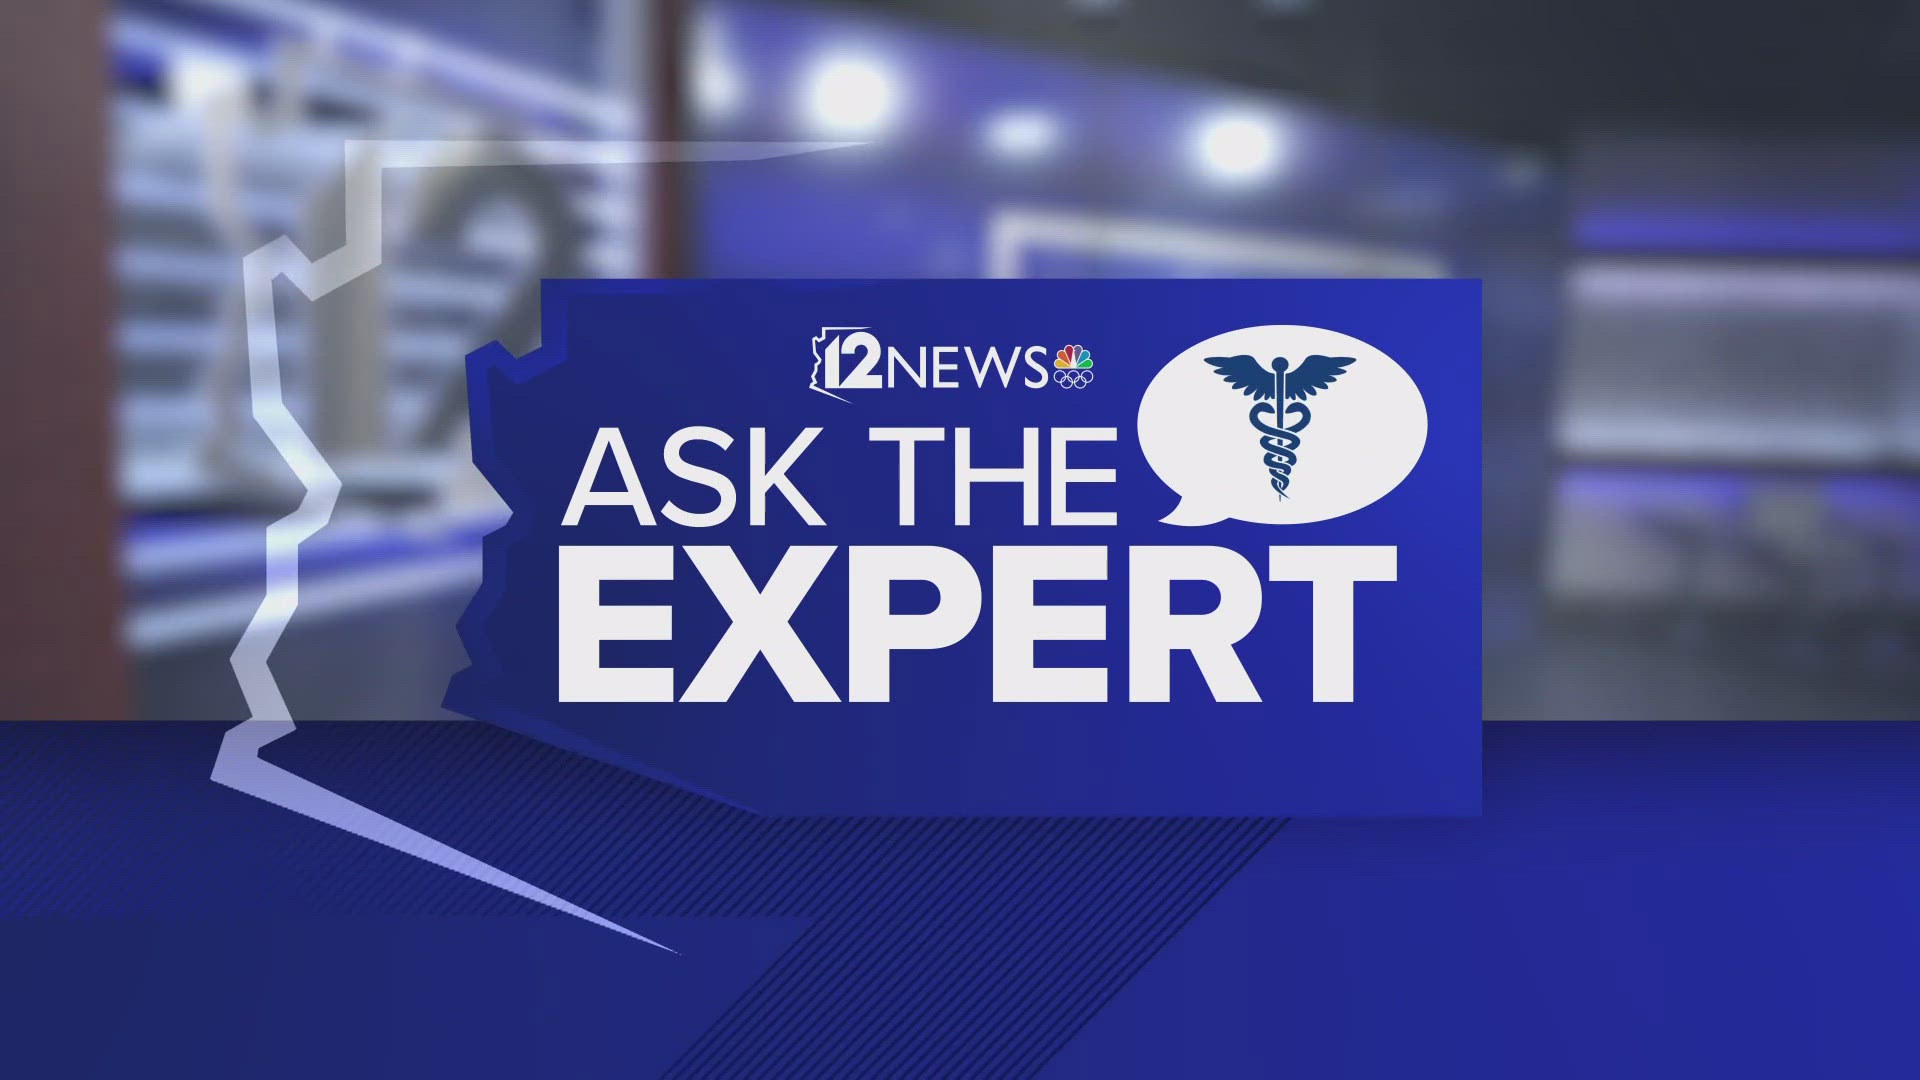 On Ask the Expert, we bring some of the Valley's most experienced professionals to discuss trending topics on health, wellness, law, relationships and even pets!